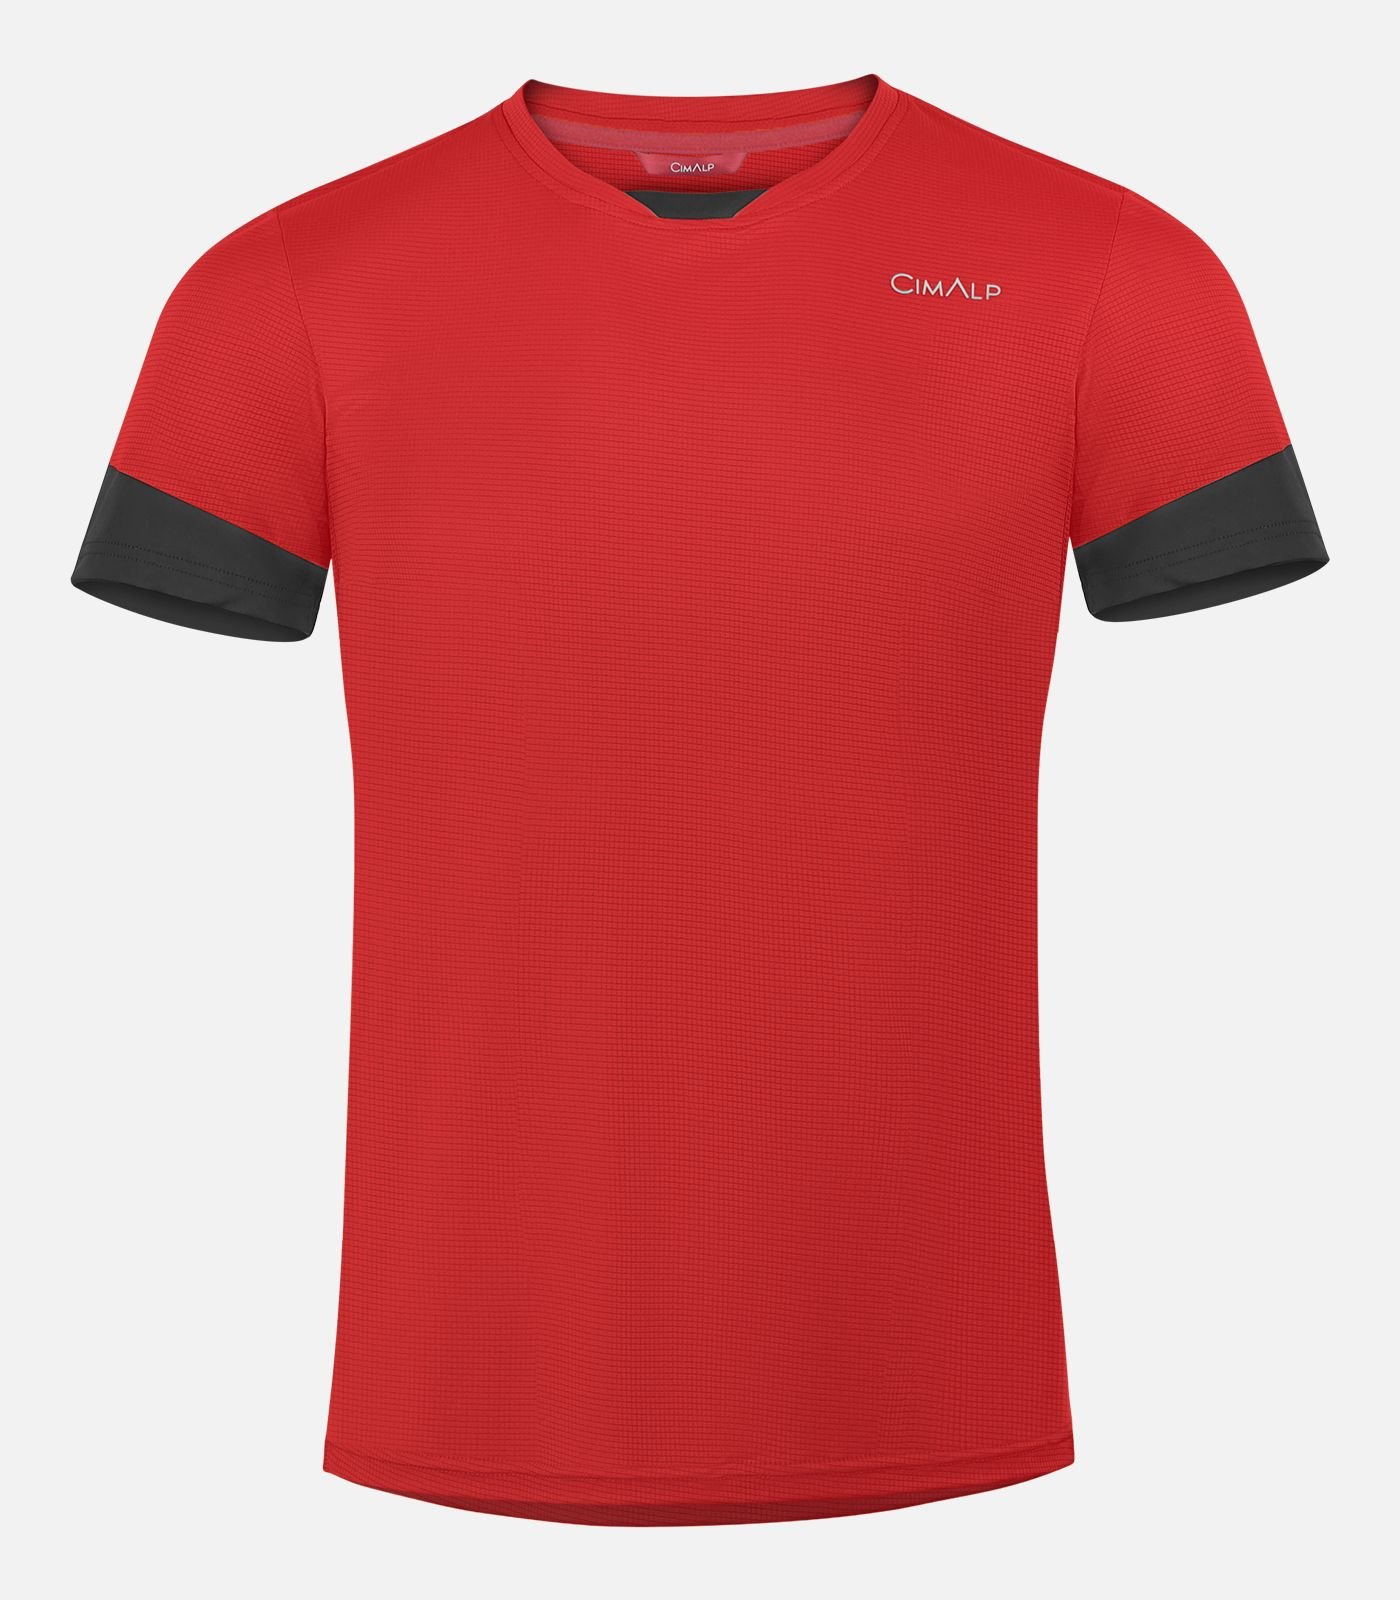 Ultra Light and Breathable T-shirt for Outdoor Sports